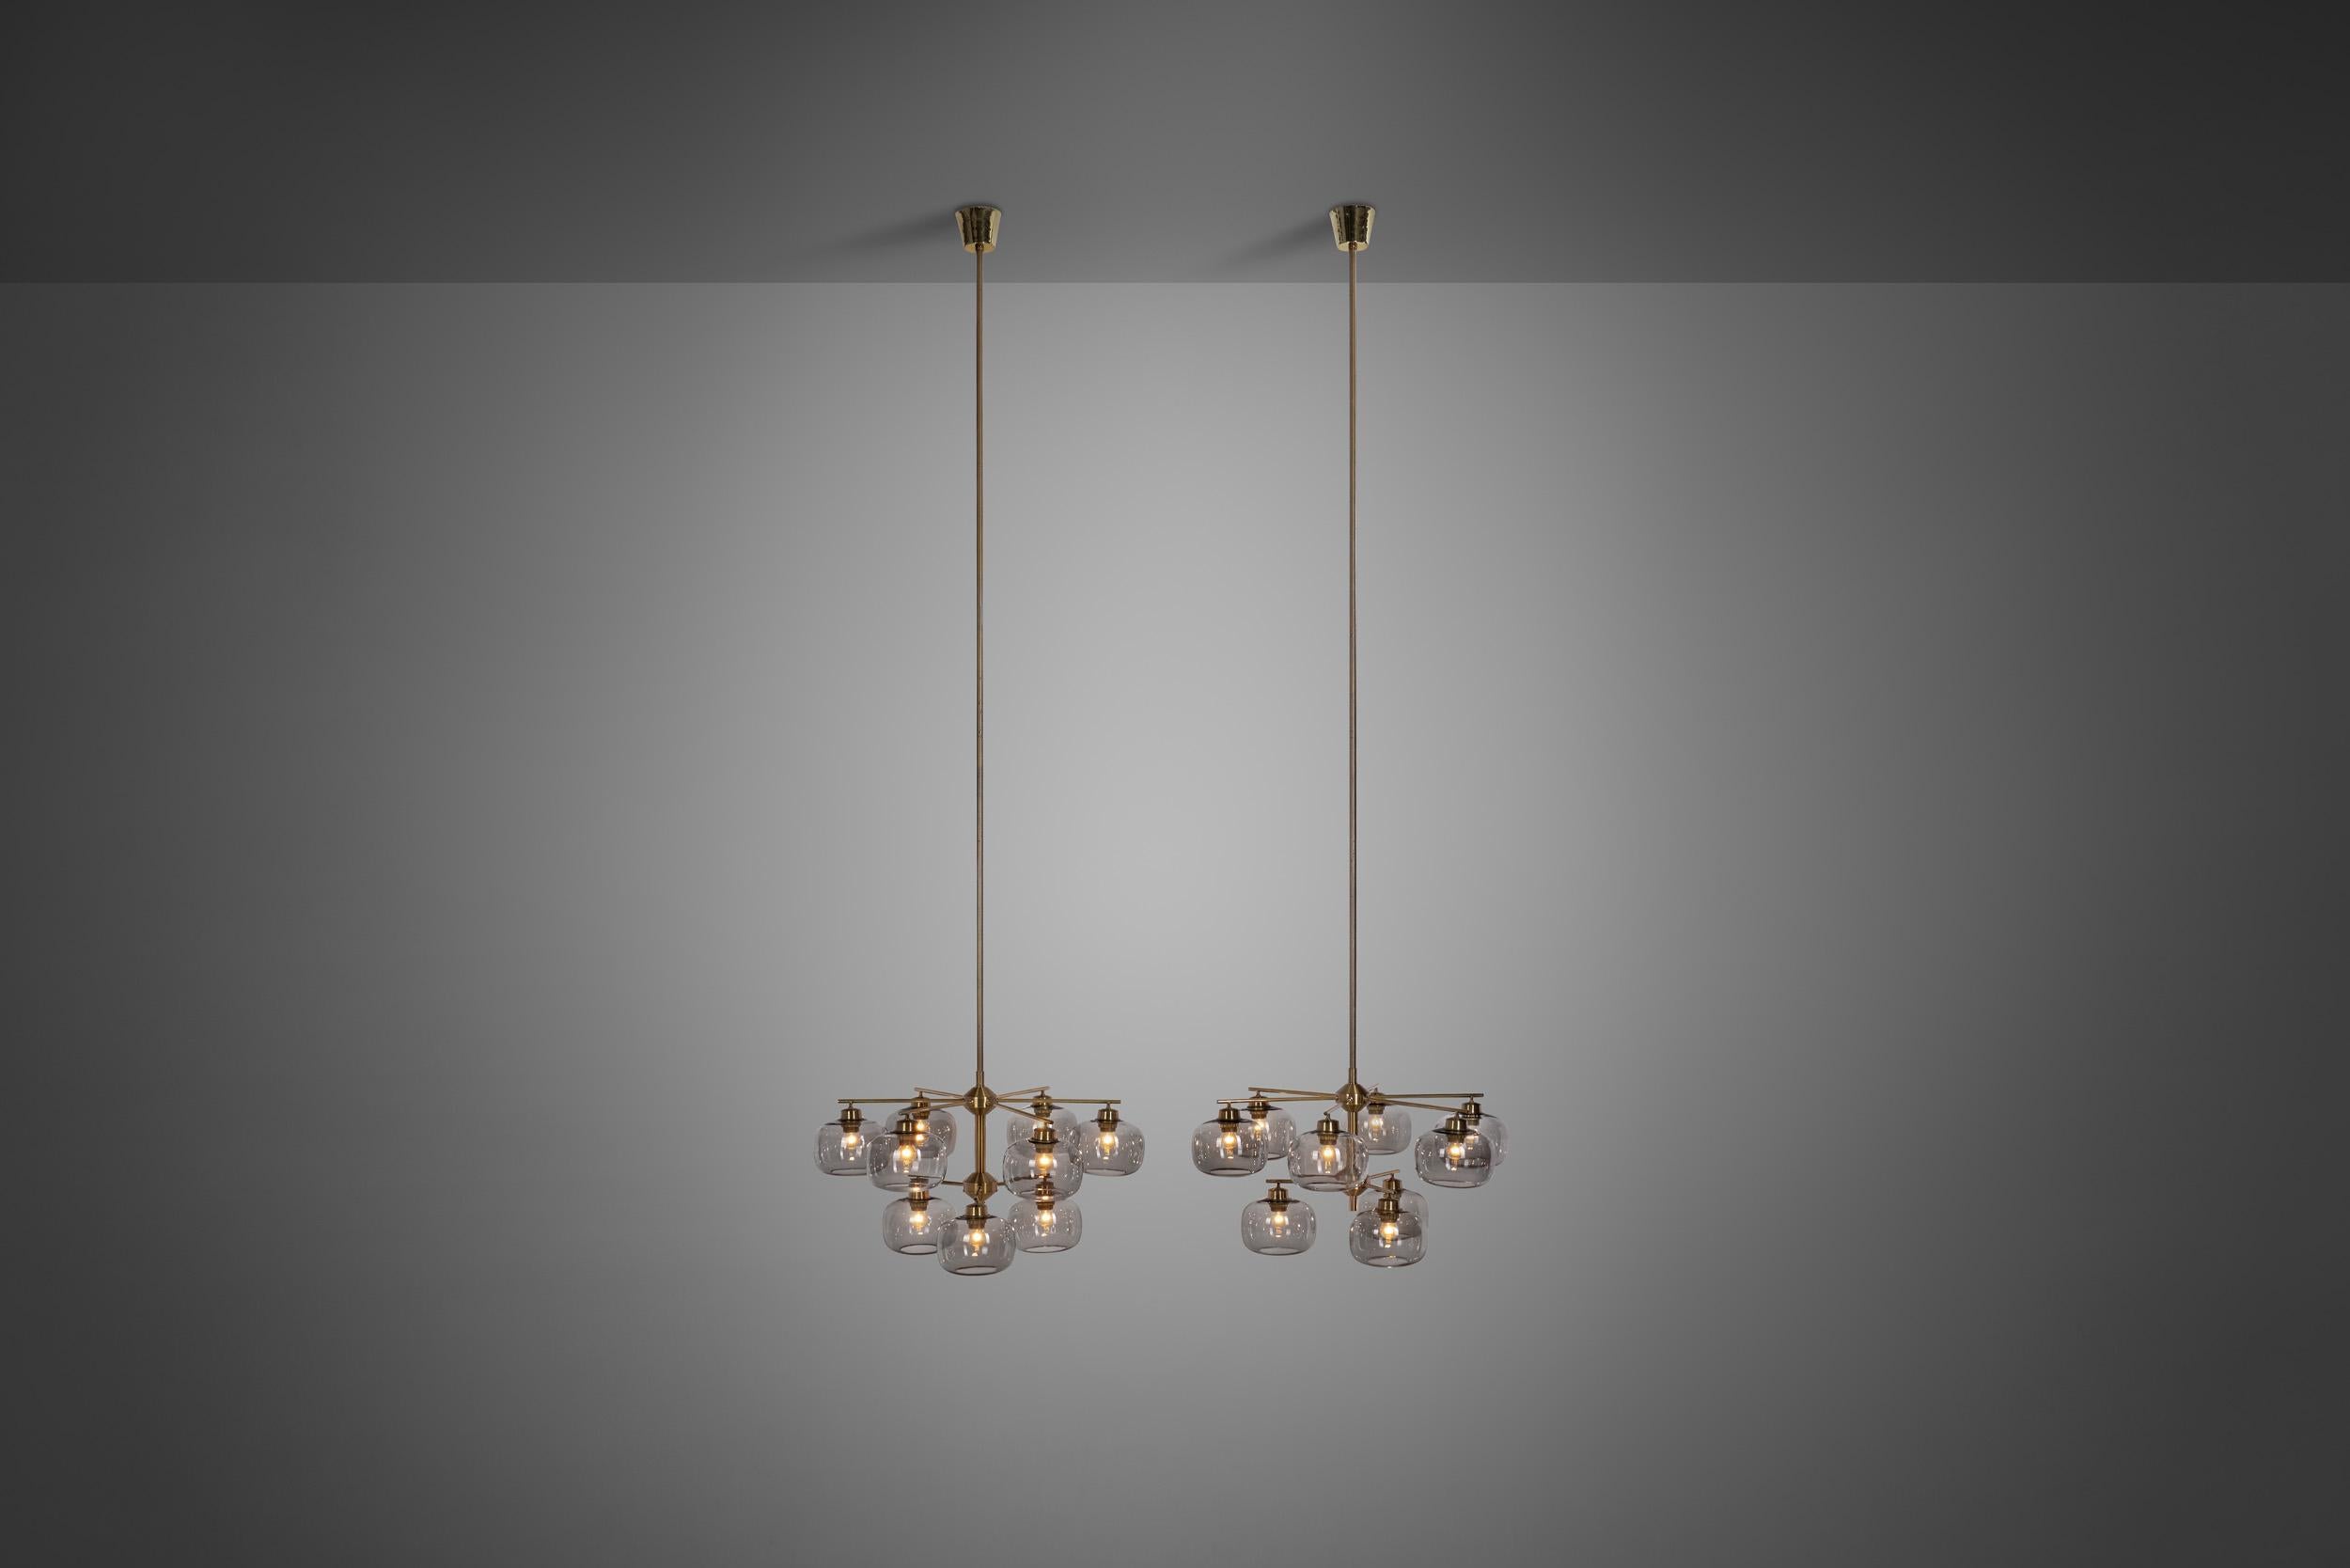 Swedish master of lighting design, Holger Johansson brought much glamour into the Swedish mid-century modernism. Without giving up the “form follows function” ideal of the era, he created spectacular models like these ceiling lights with a grandiose